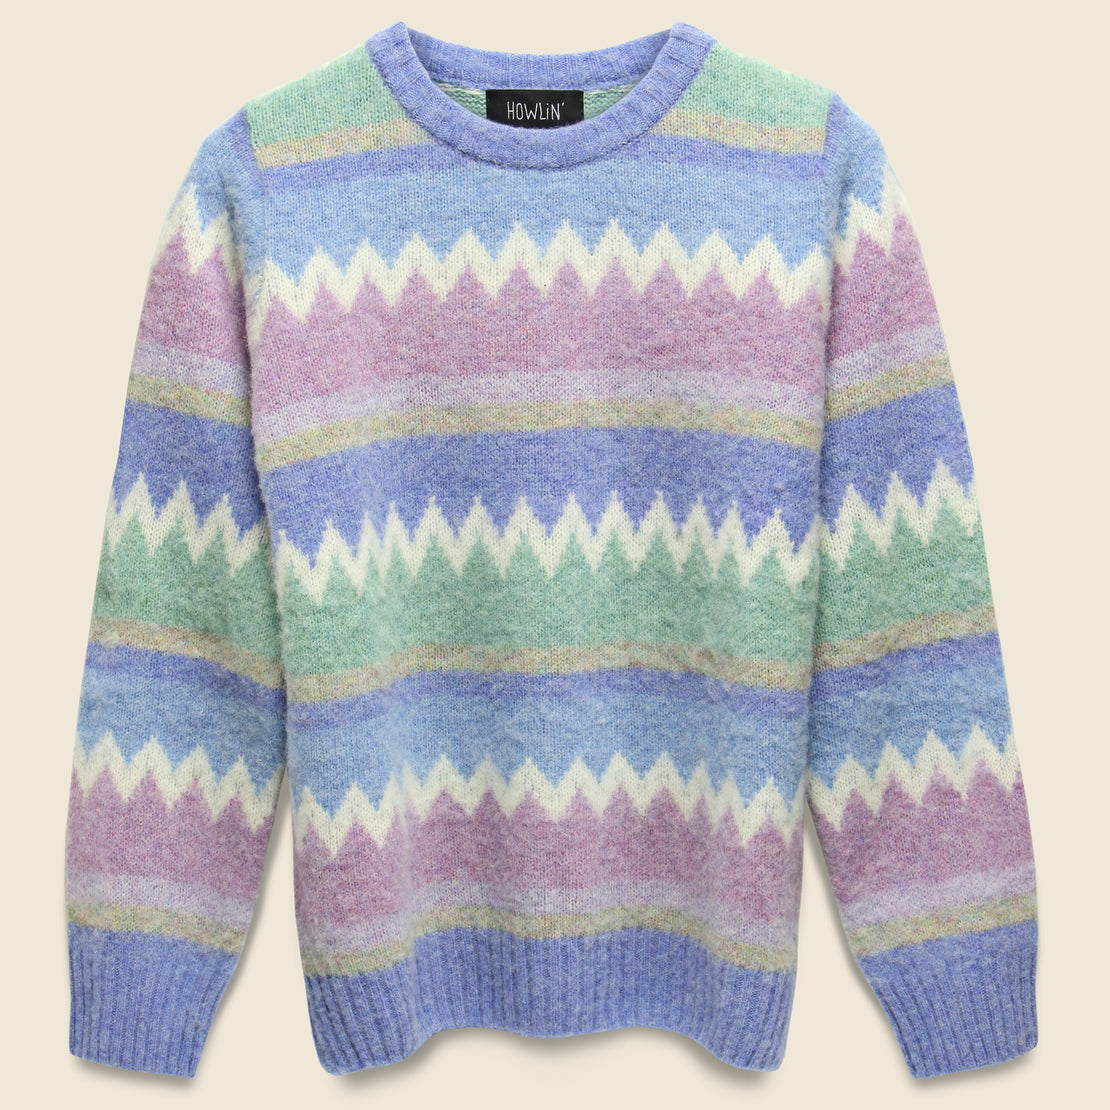 Howlin High Tension Sweater - Wave